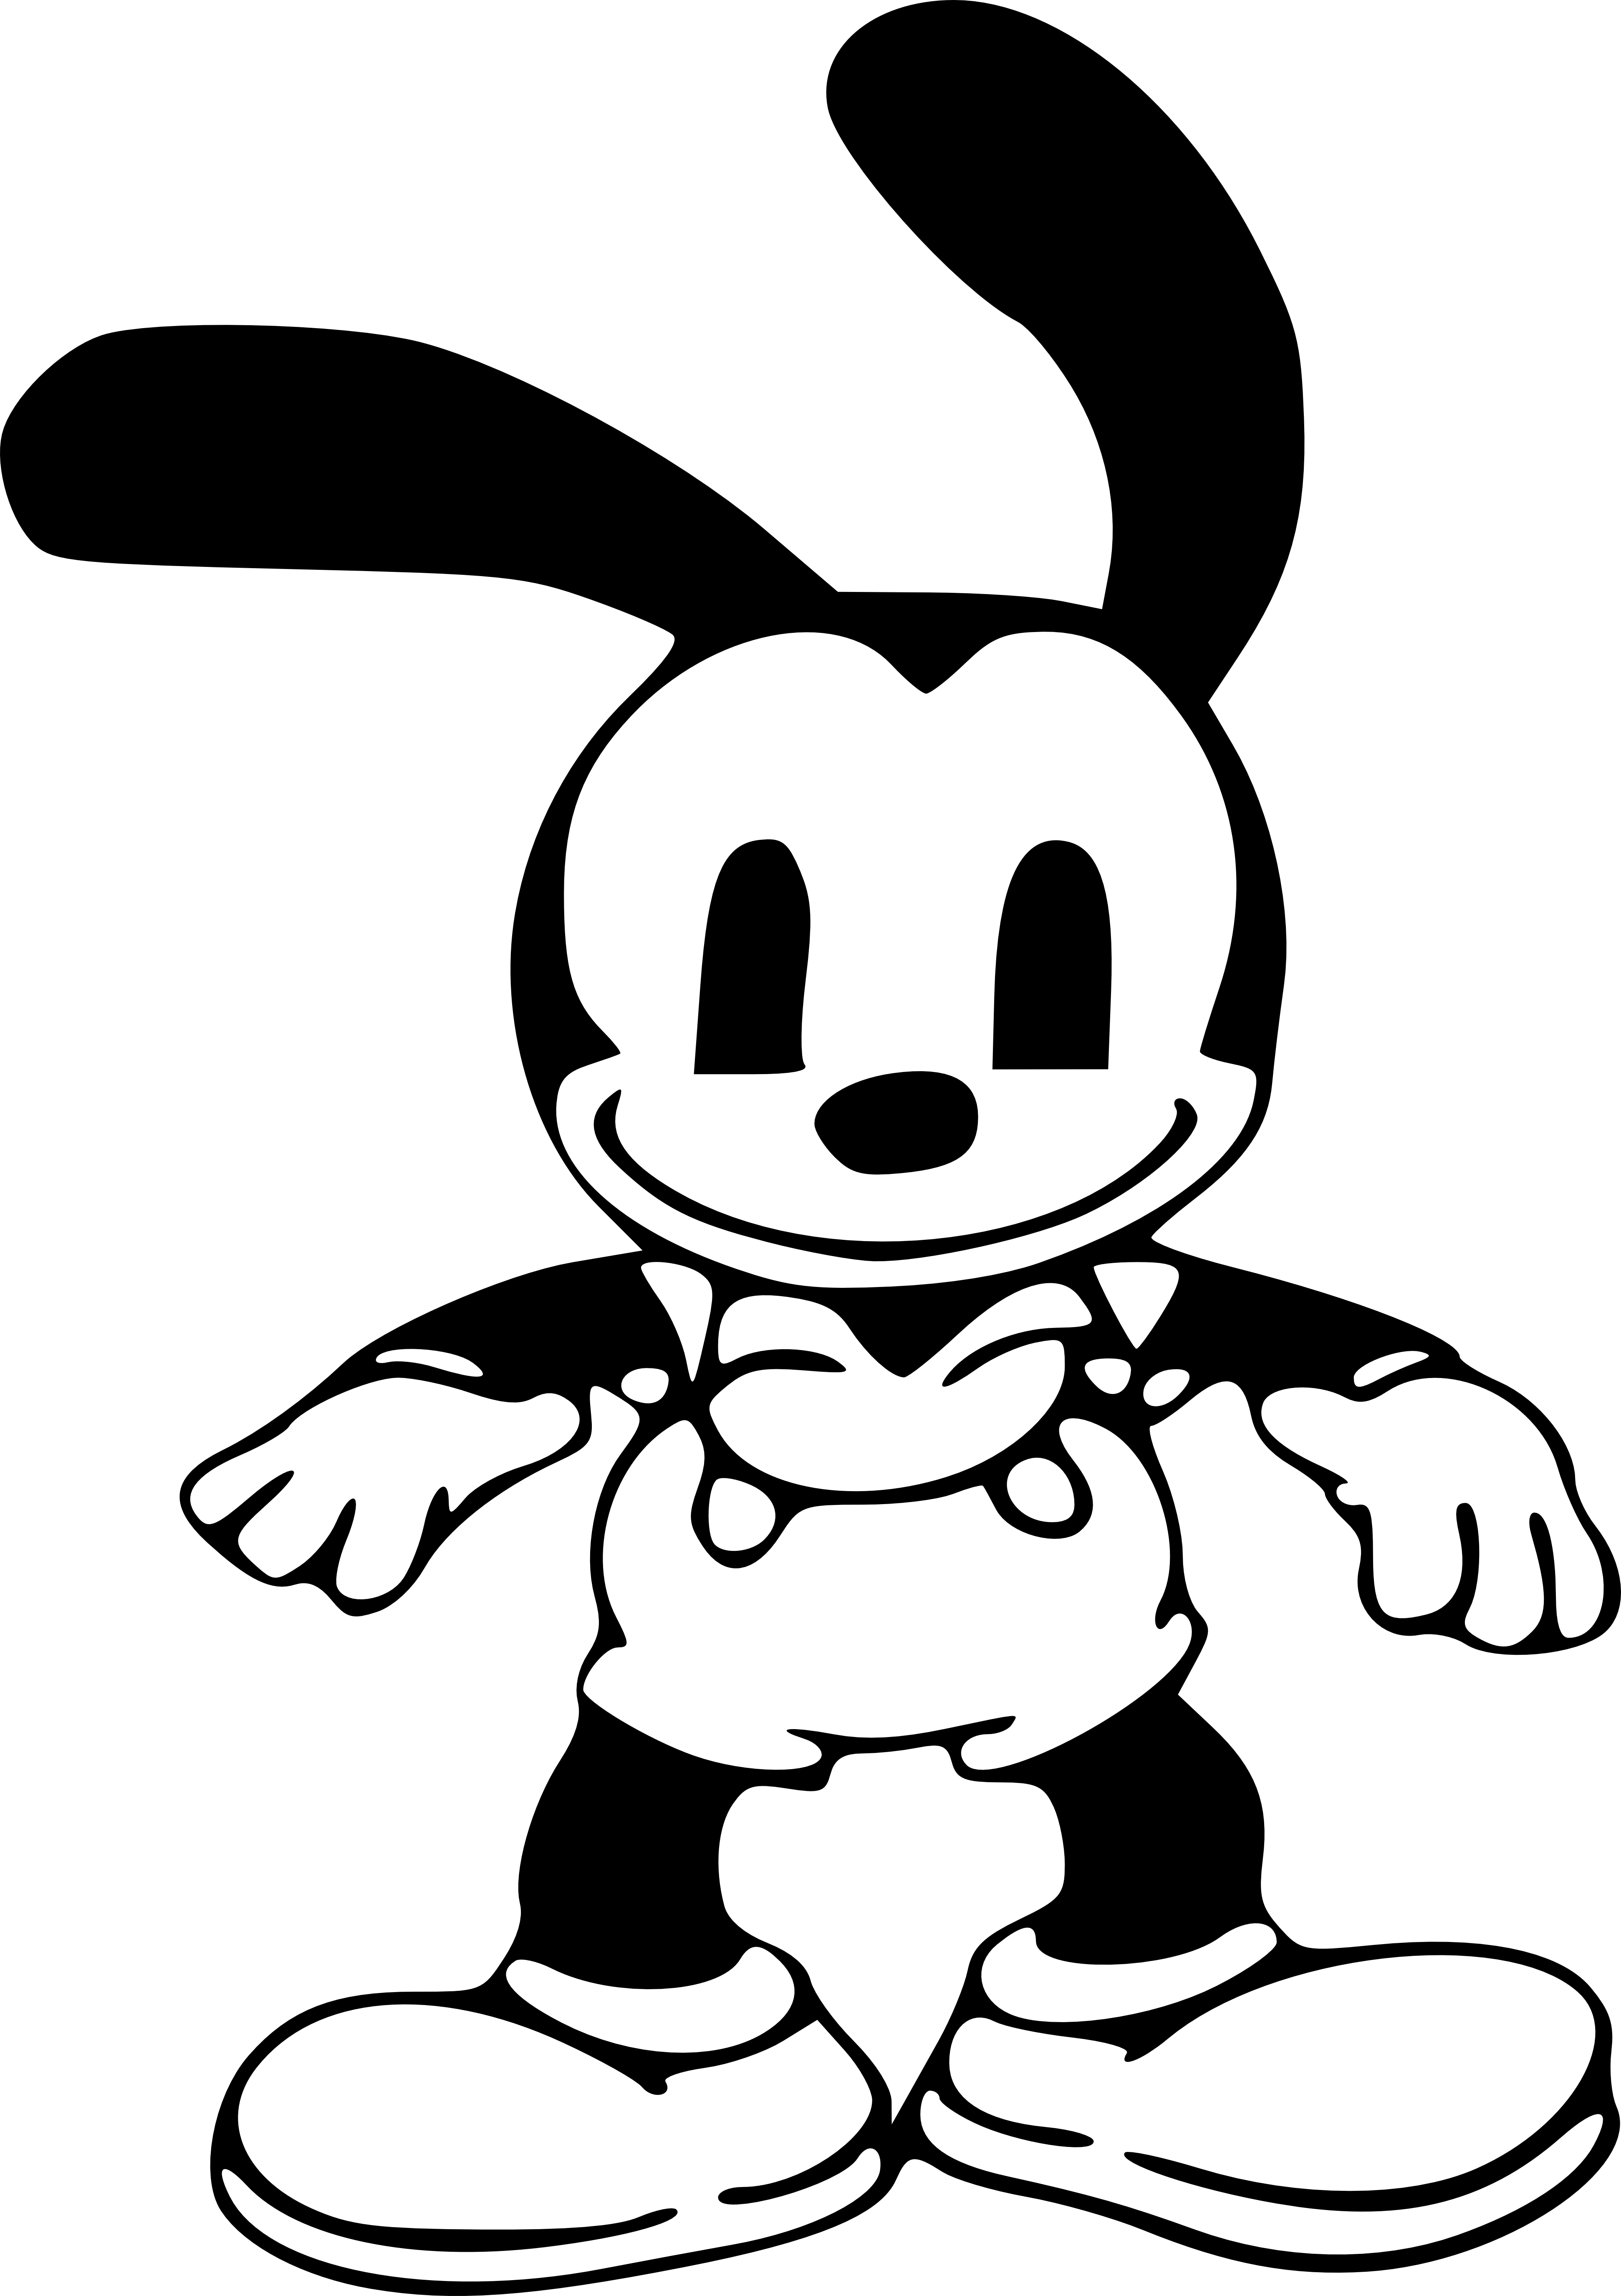 Oswald The Lucky Rabbit Transparent Image PNG Image